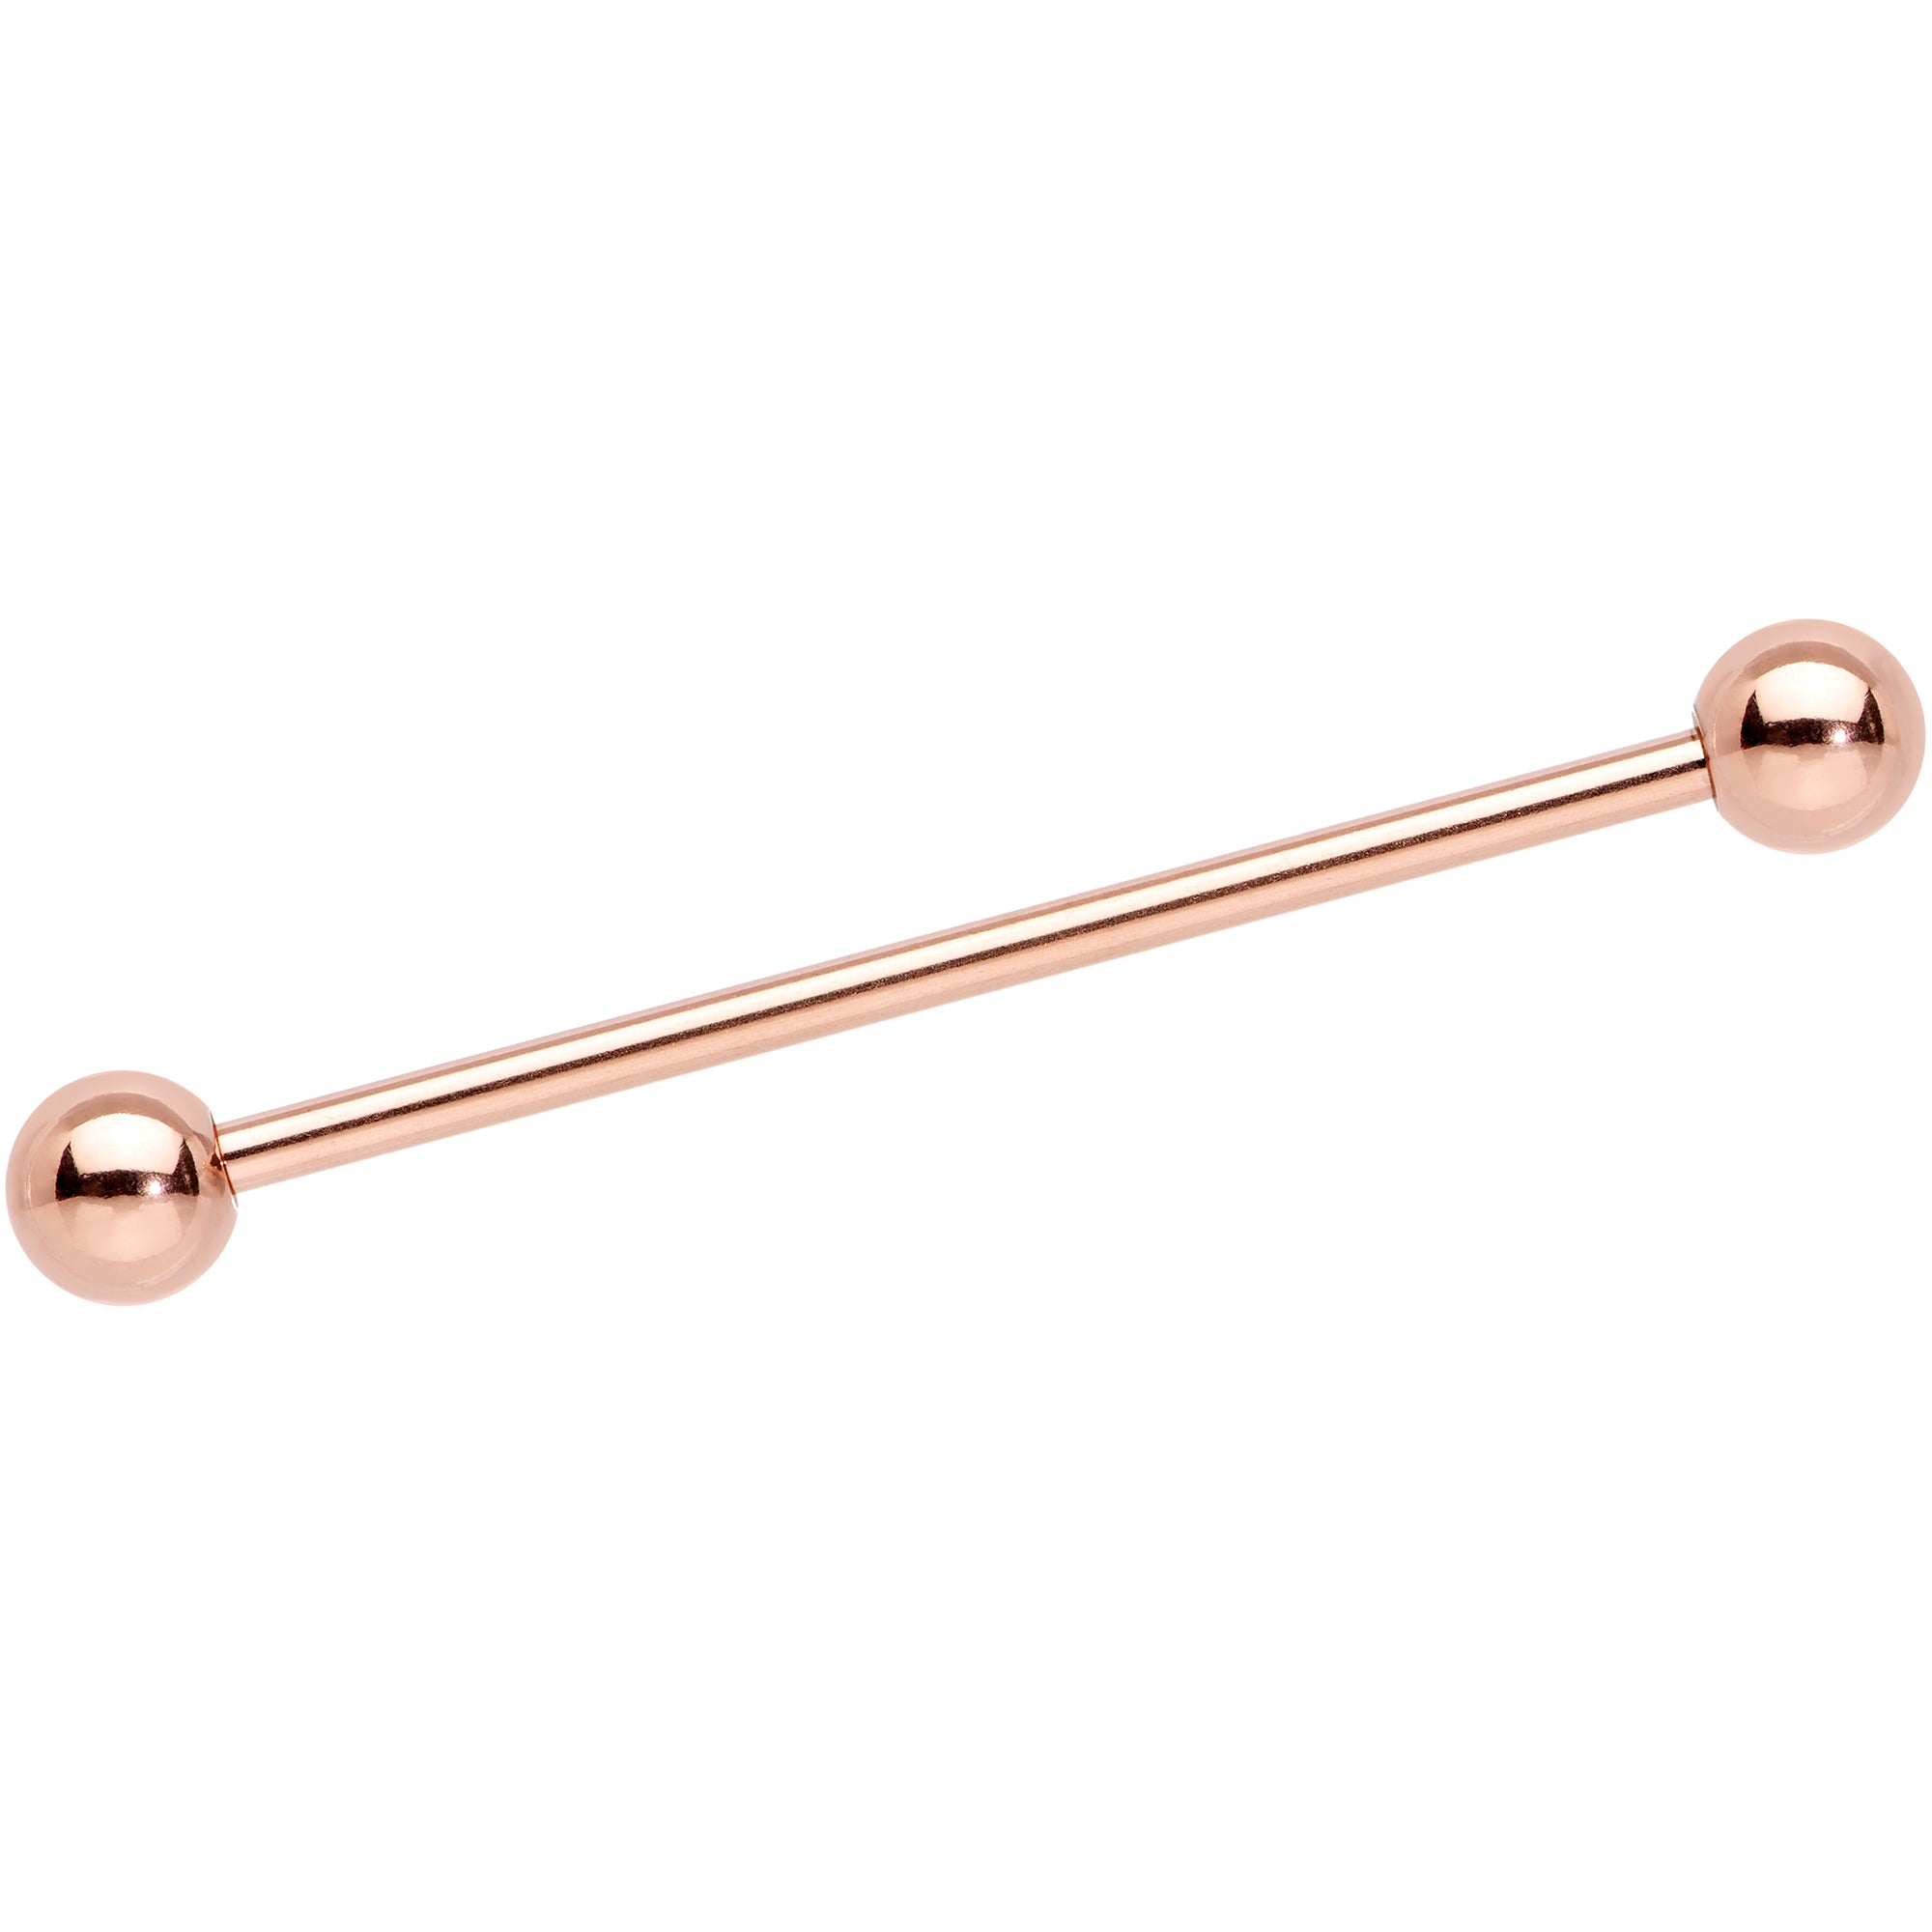 14 Gauge 1 1/4 Rose Gold Plated Straight Barbell